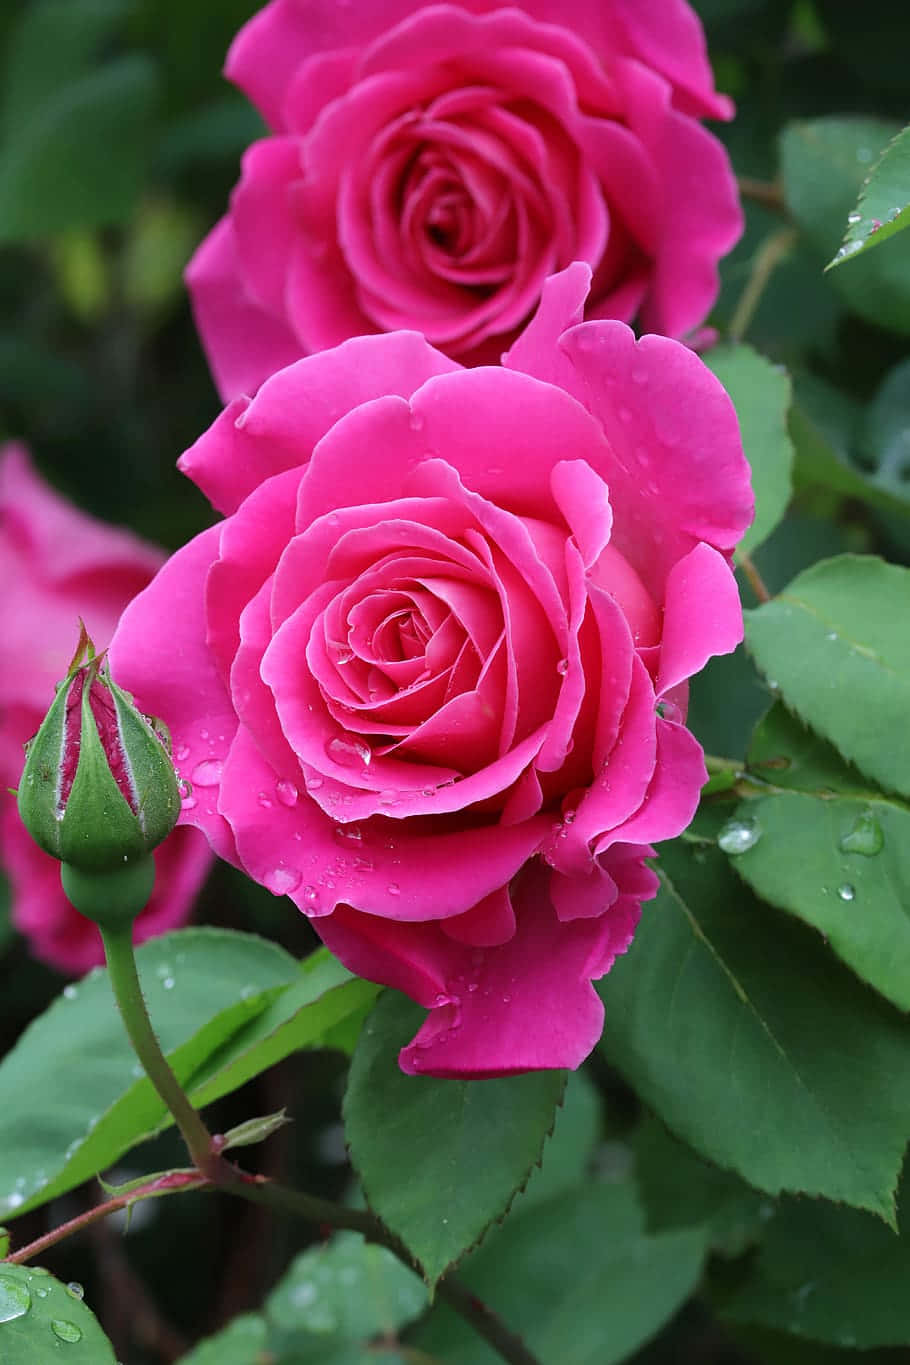 Blooming Love with Beautiful Roses